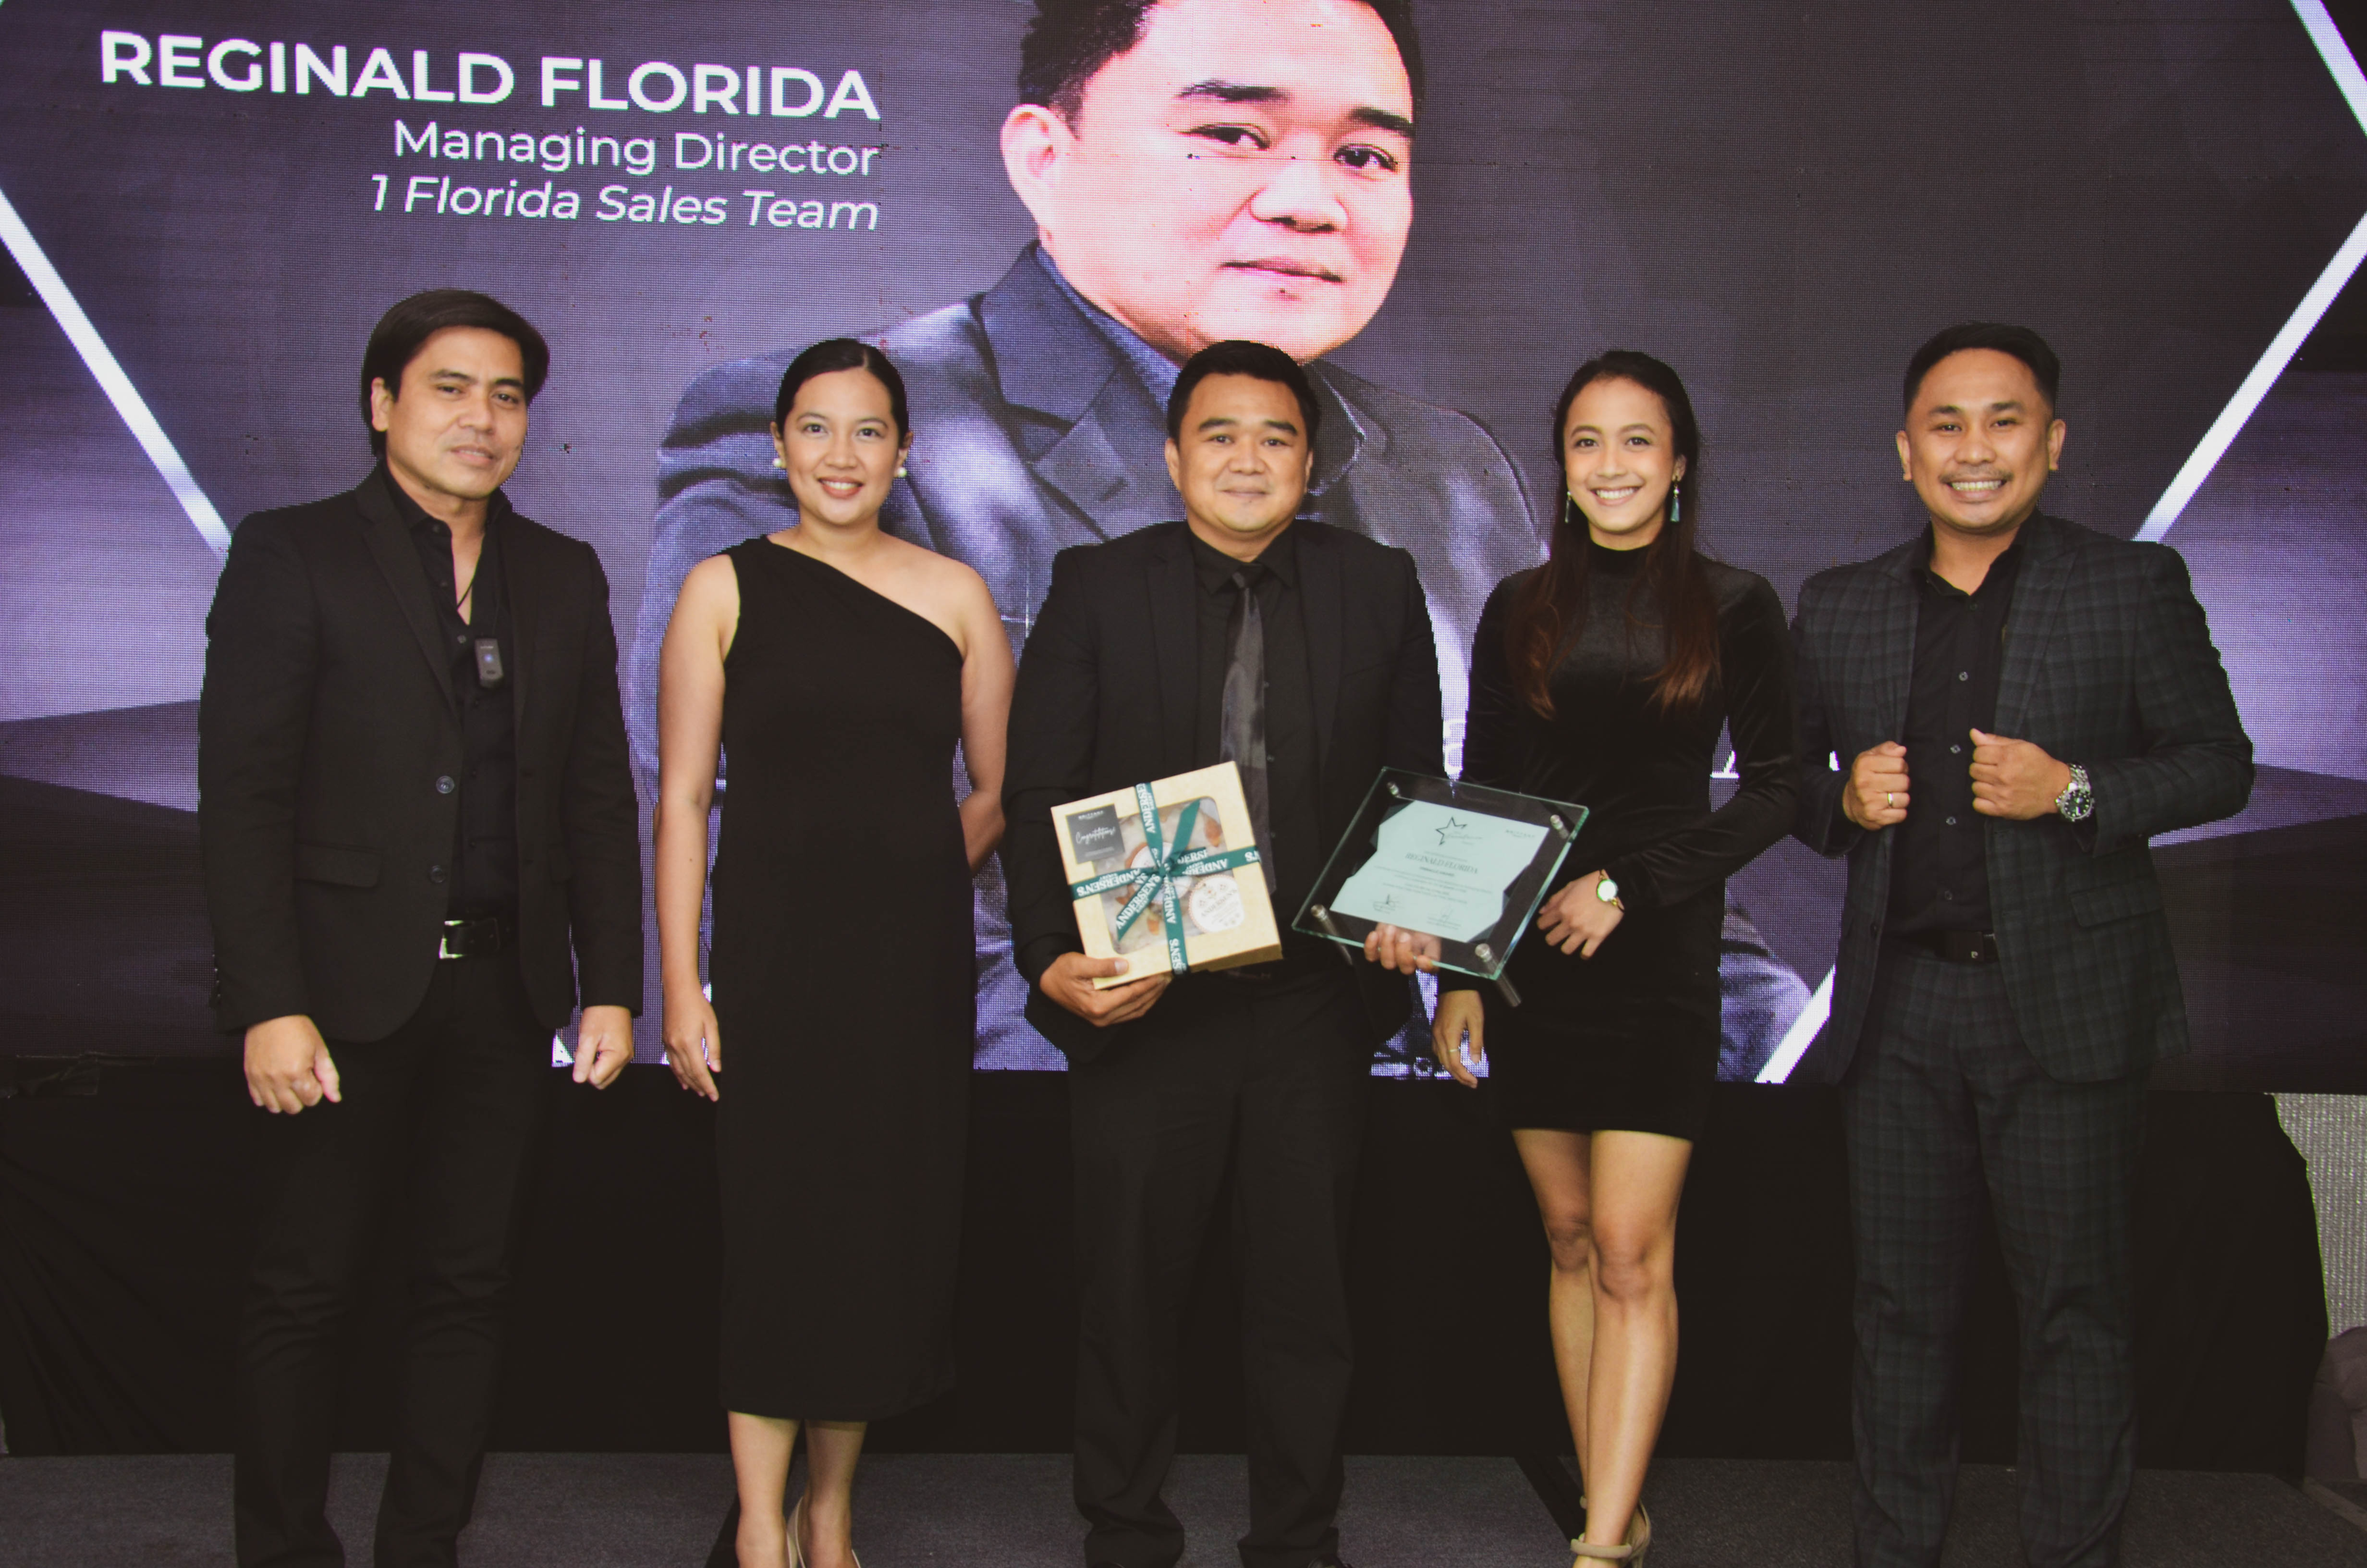 Pinnacle Award, which recognized the top Managing Director for the first quarter